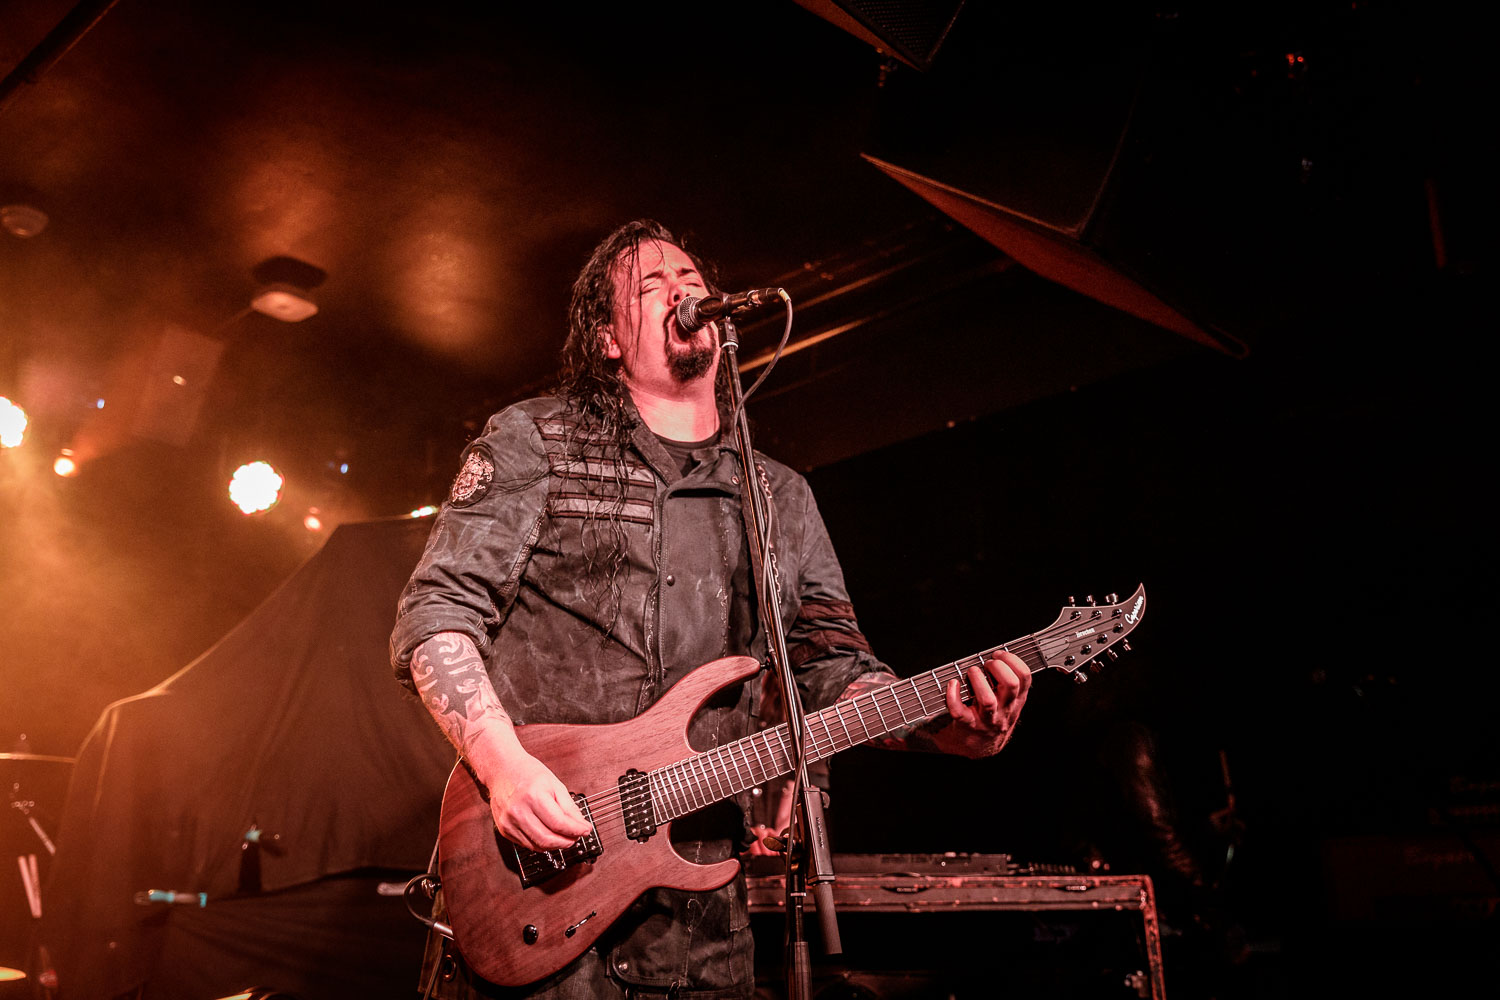 Evergrey at The Academy Club in Manchester on March 21st 2019.